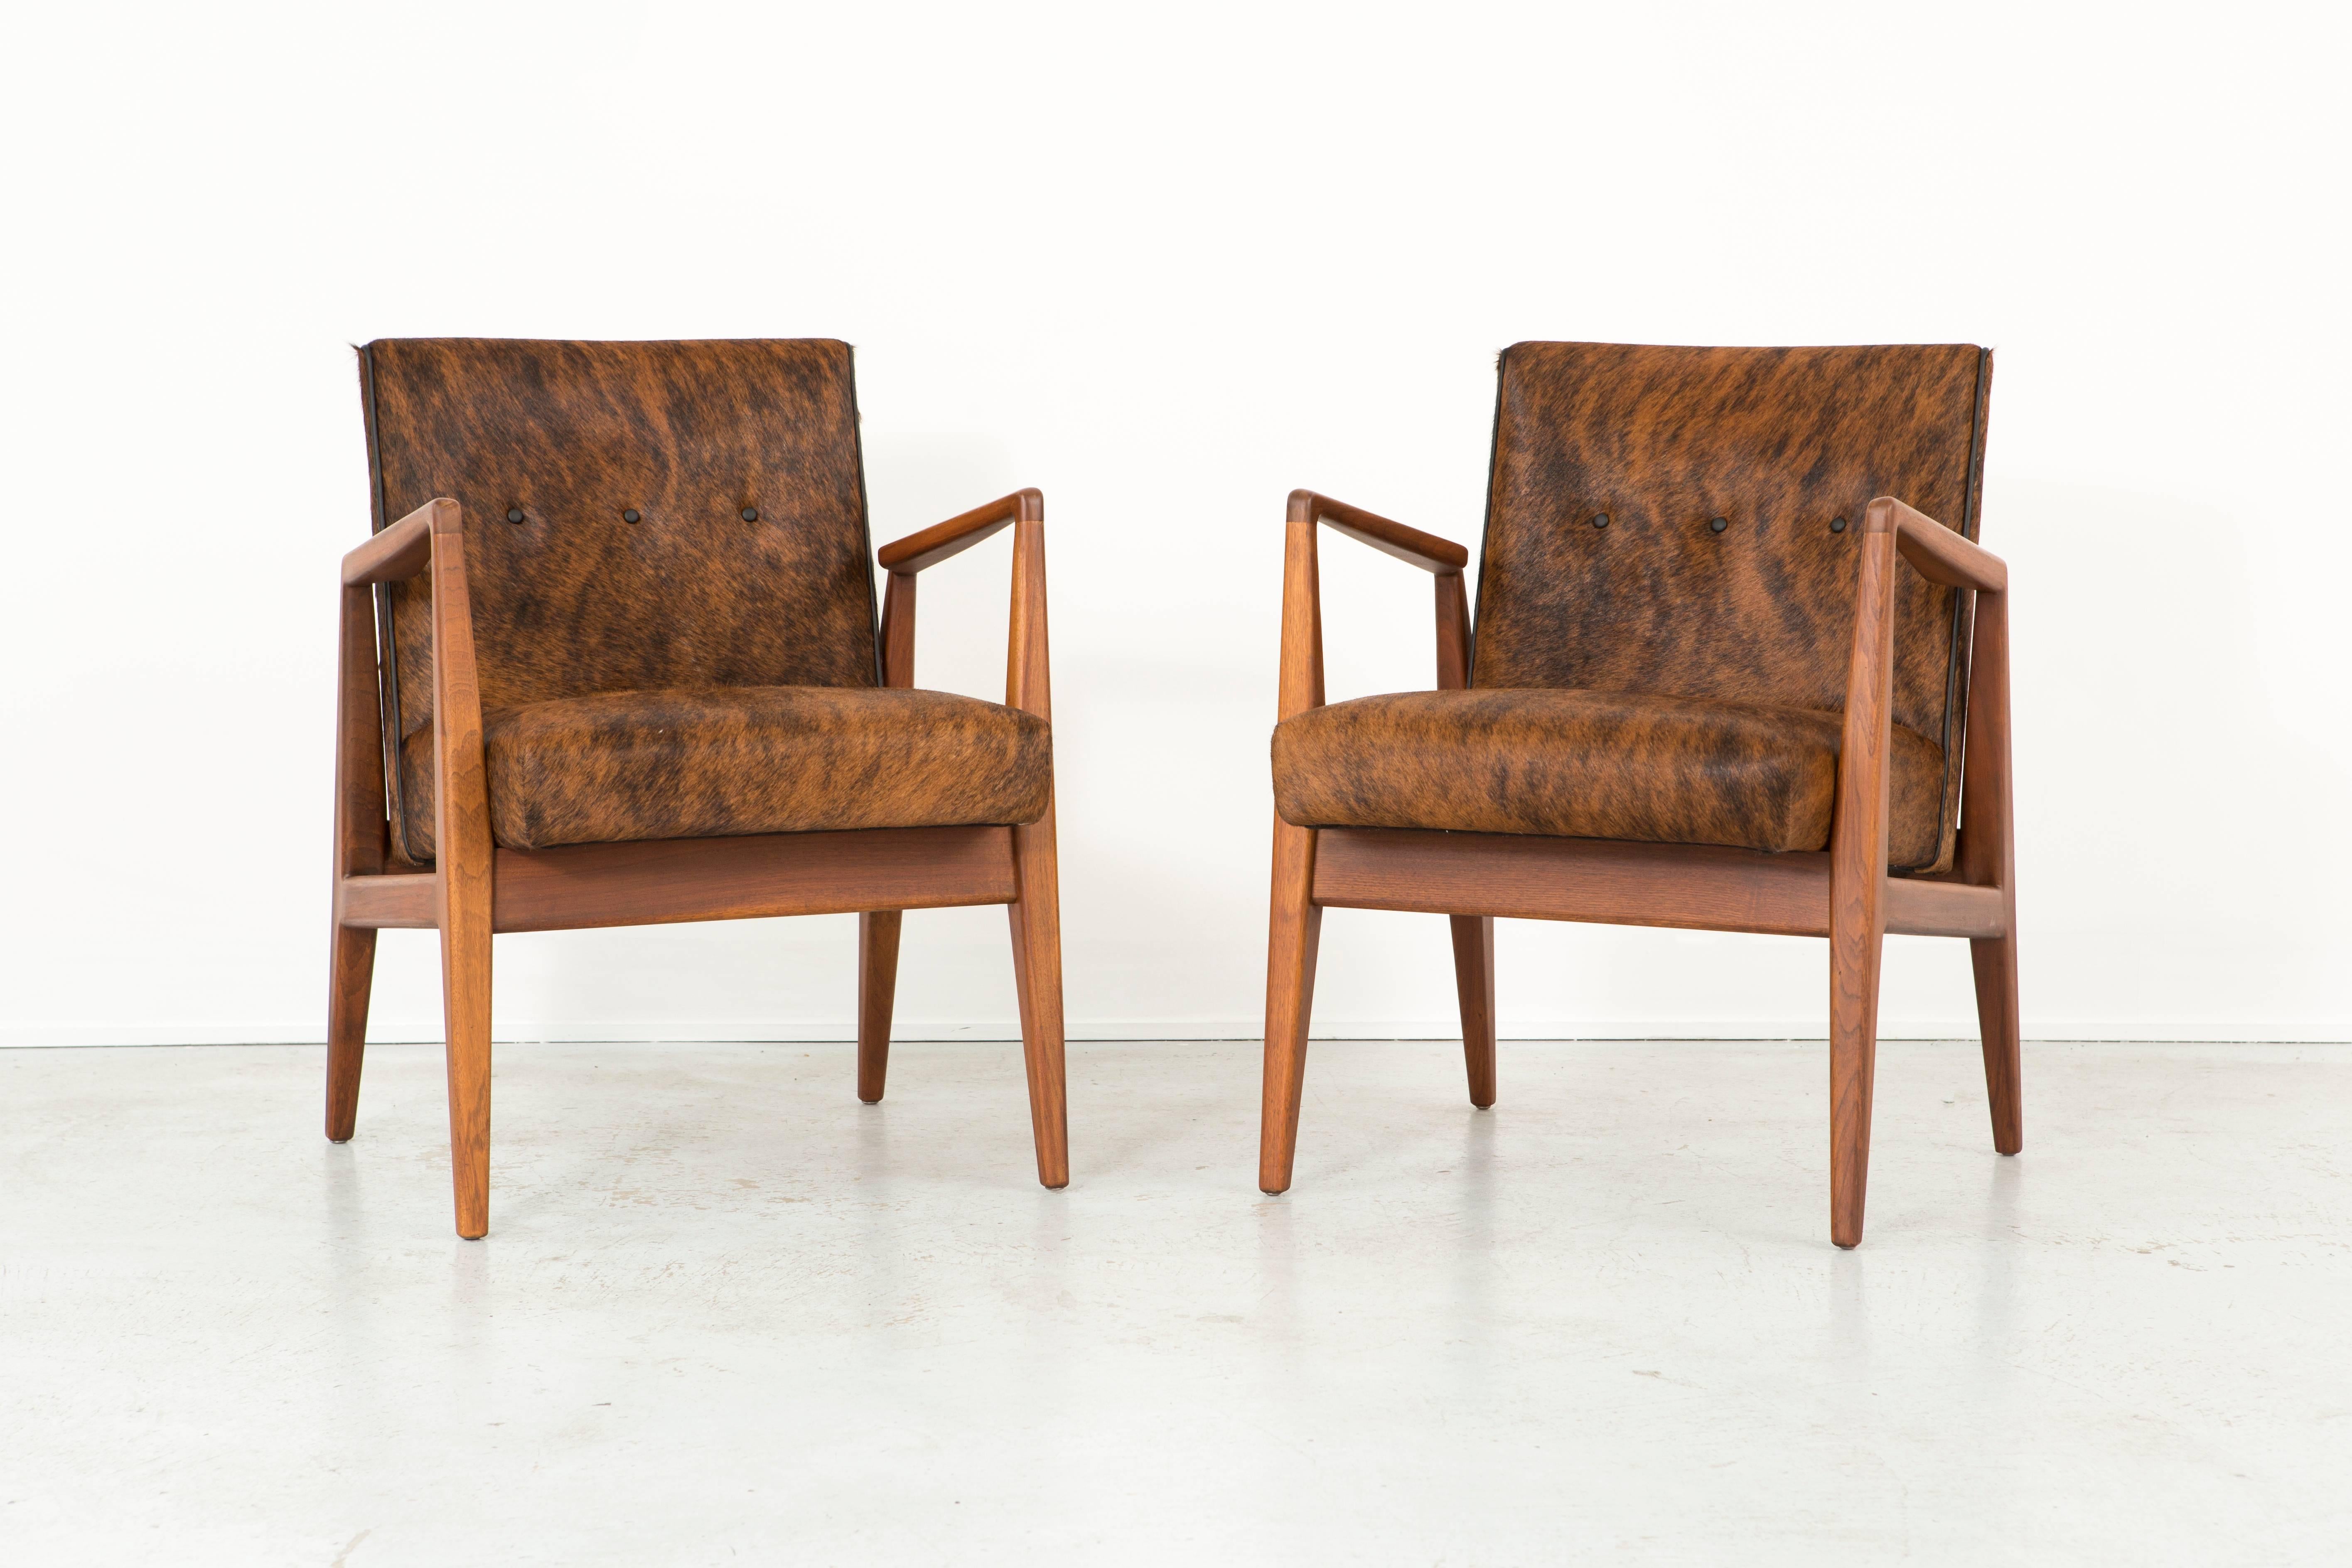 Set of two lounge chairs.

Designed by Jens Risom for Jens Risom Design,

USA, circa 1950s.

Reupholstered in Brazilian brindle hair-on-hide + walnut.

Measure: 31 ¼” H X 23 ¼” W X 24” D X seat 18 ½” H.

Wooden frames have been restored.

Sold as a